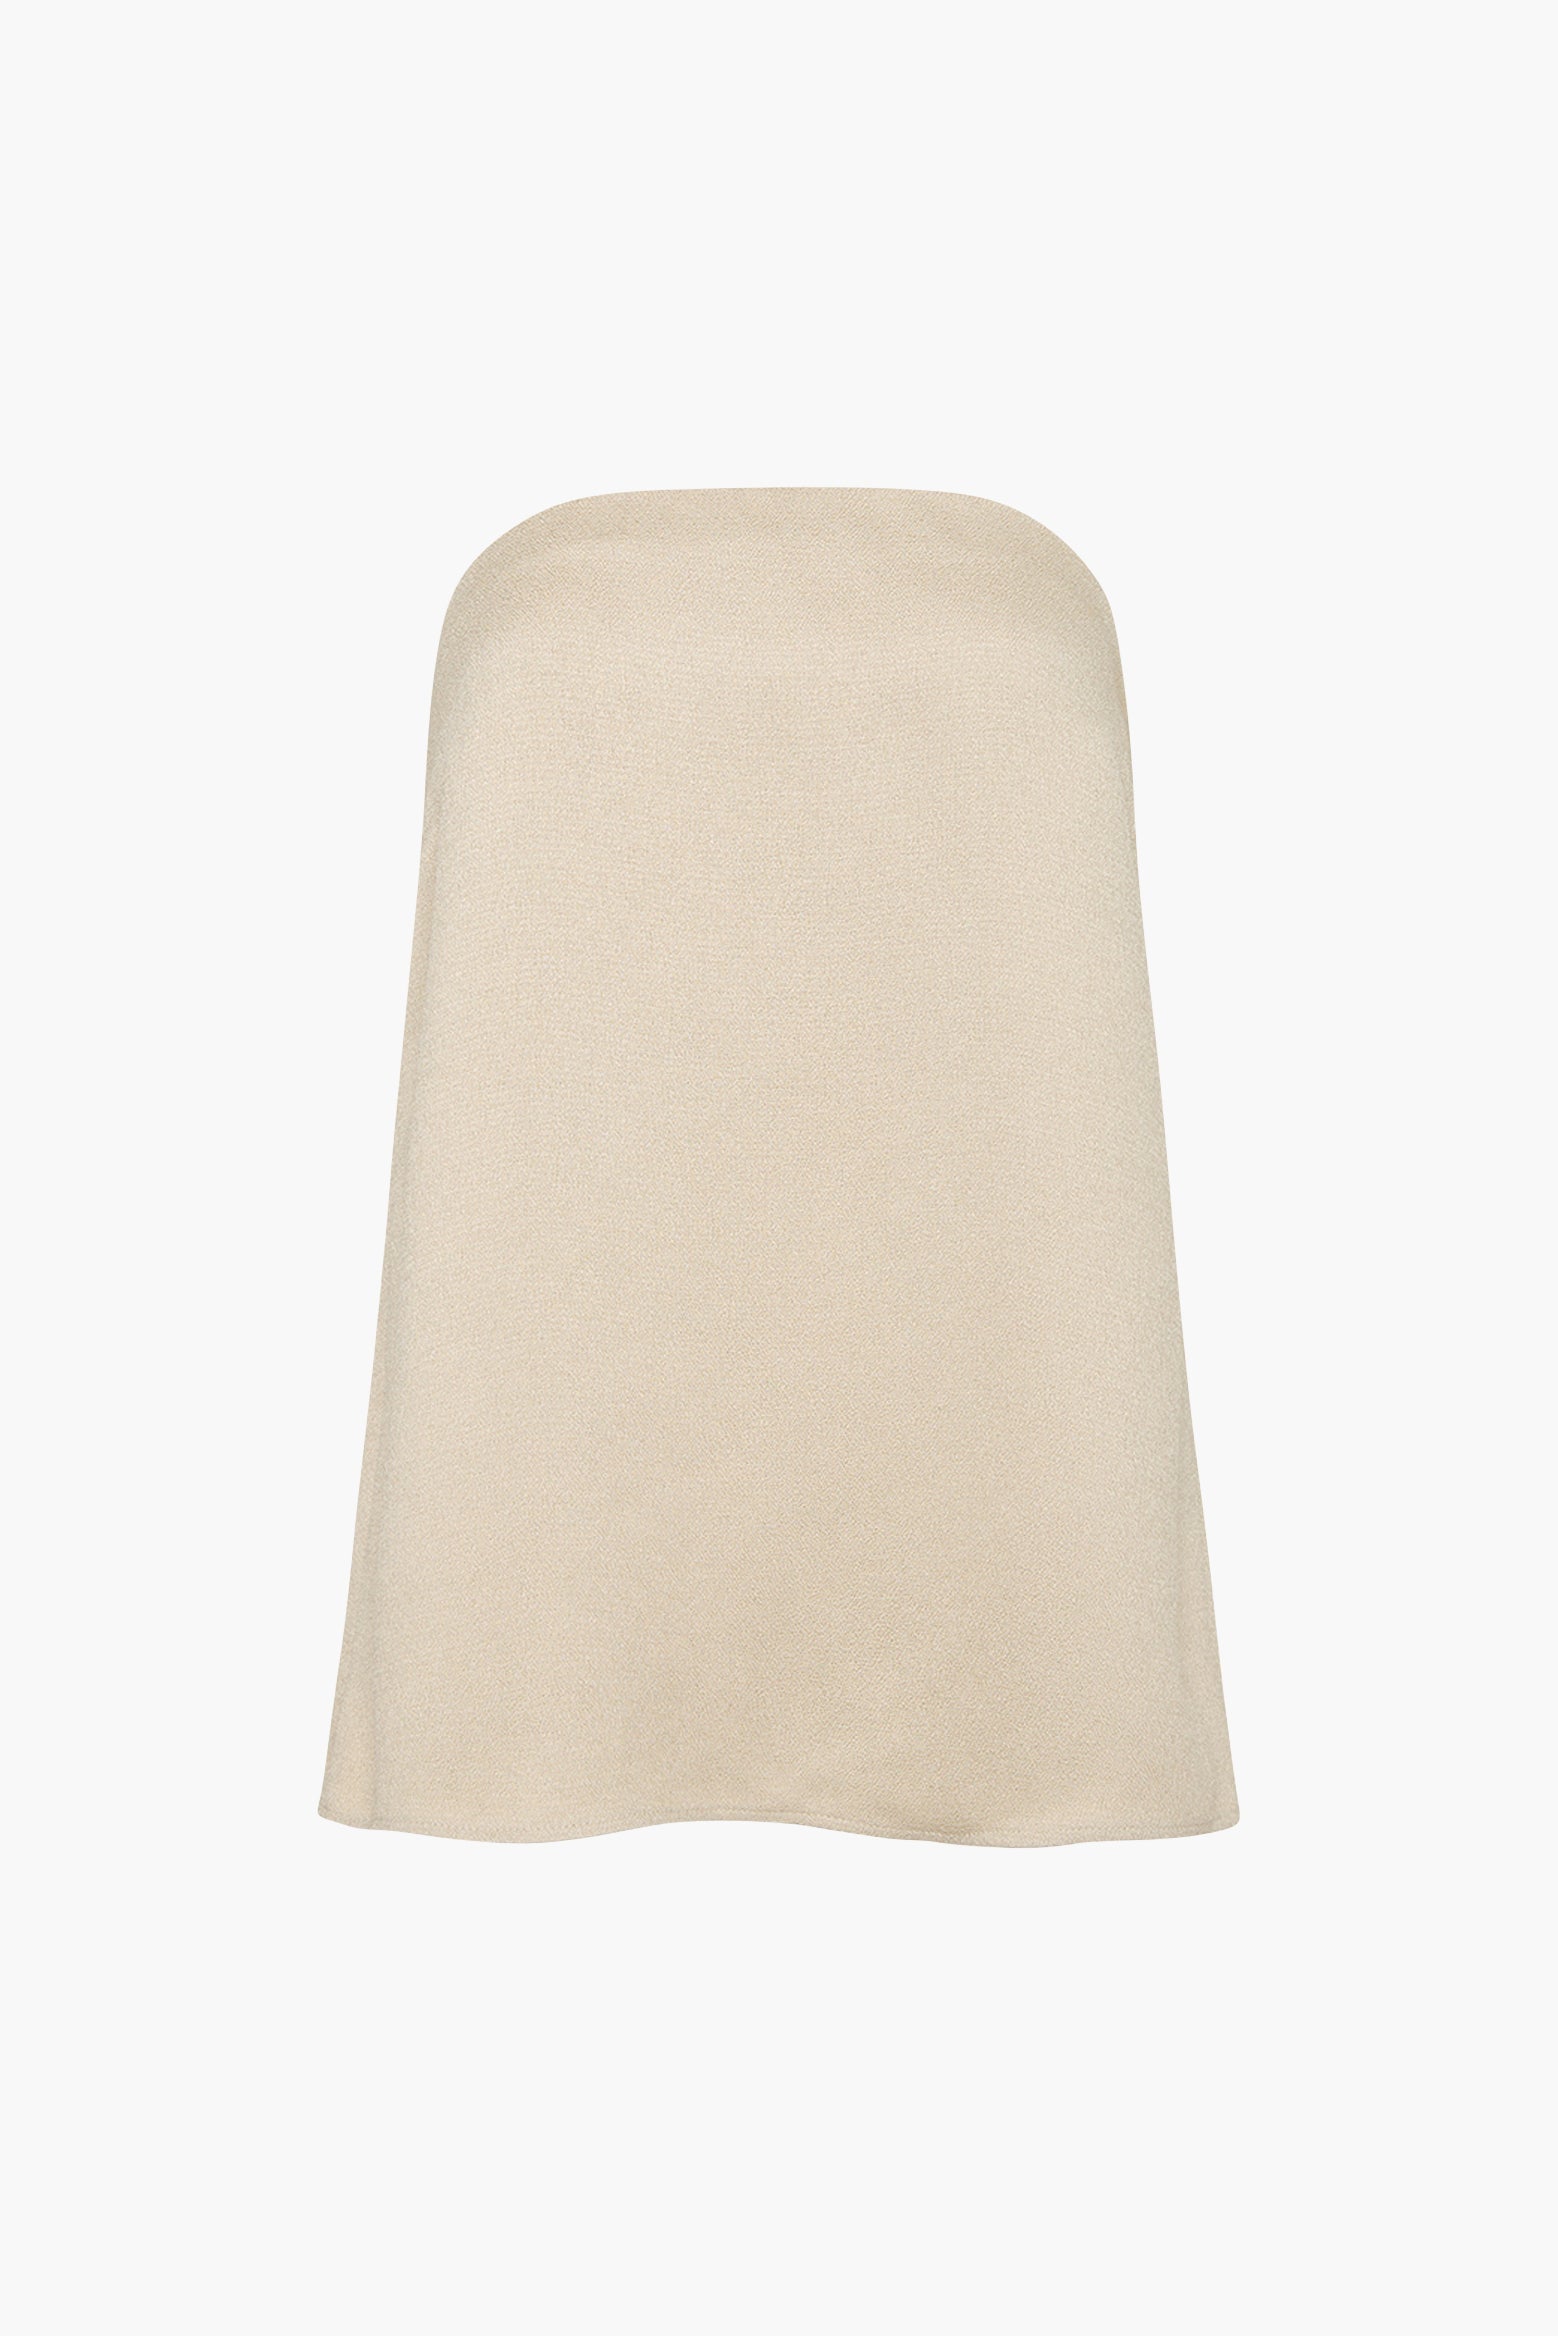 Esse Oude Column Top in Oyster available at TNT The New Trend Australia.